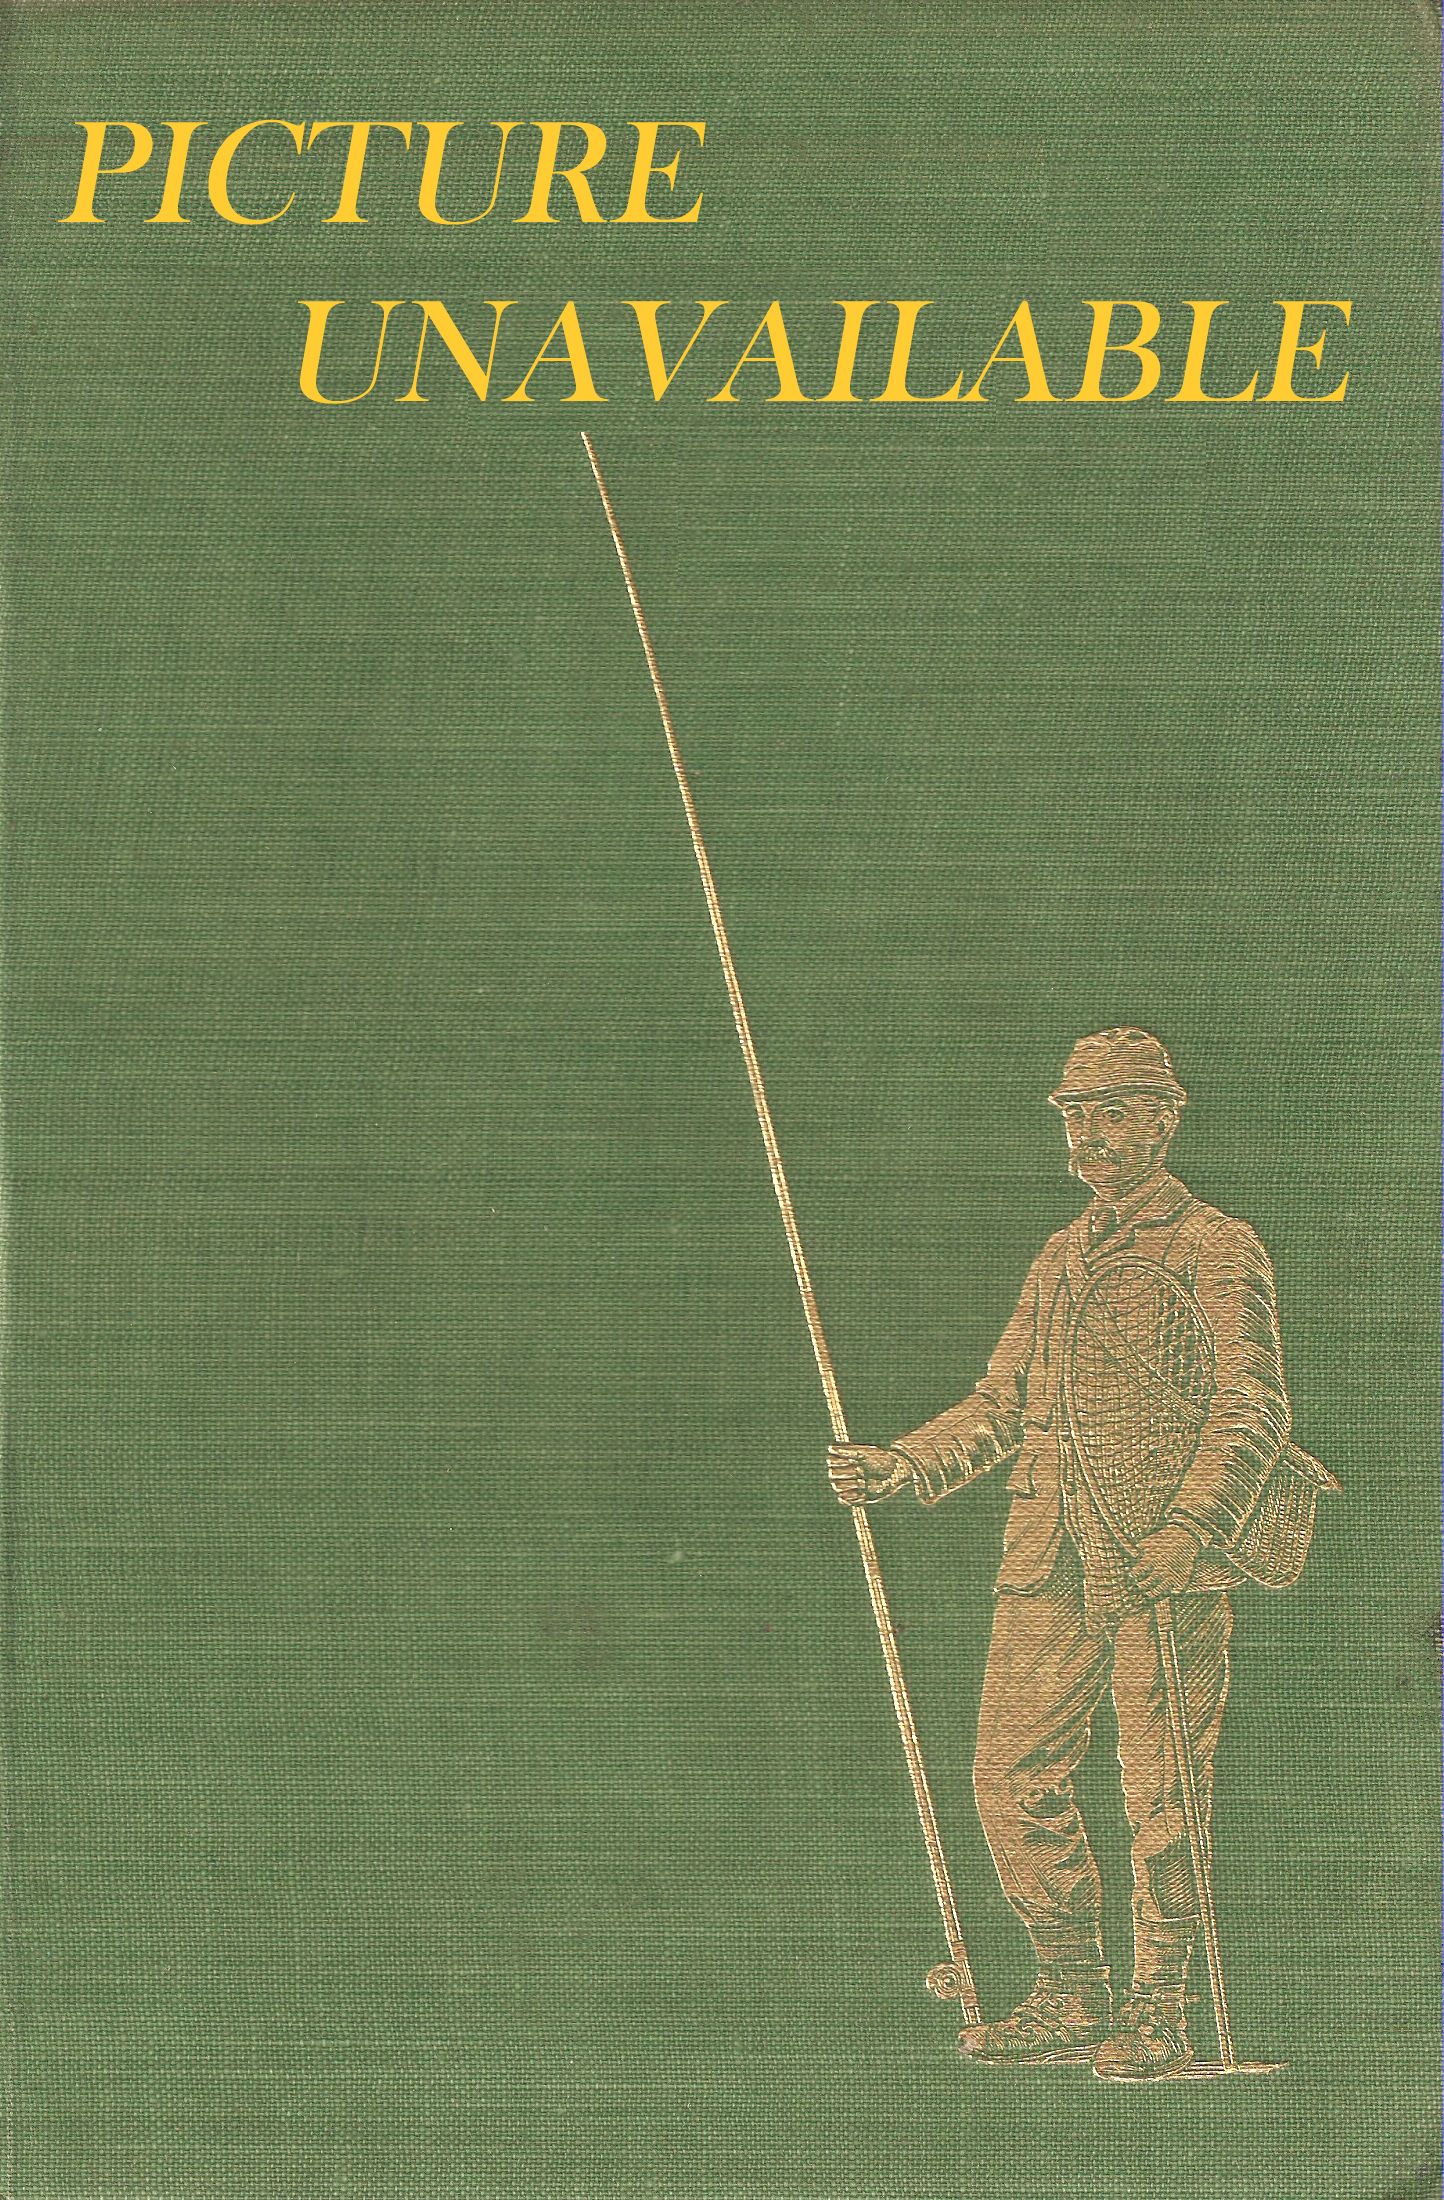 LEFTY'S LITTLE LIBRARY OF FLY FISHING: FLY FISHING FOR TROUT. VOLUME SIX - NYMPHING STRATEGIES. By Larry Tullis.